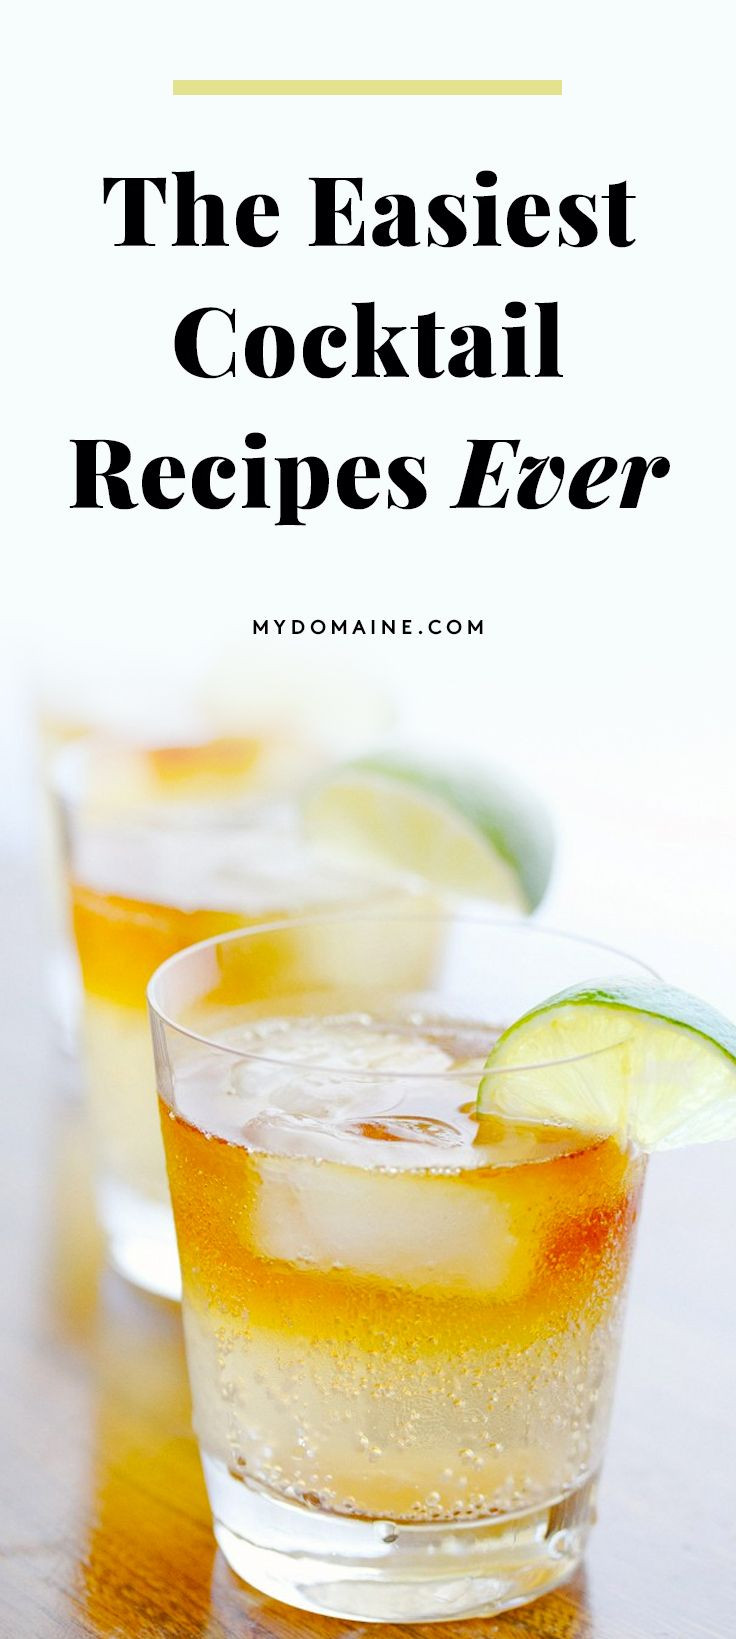 Simple Drinks With Vodka
 Over Rosé Mix Up Your Happy Hour With These 2 Ingre nt